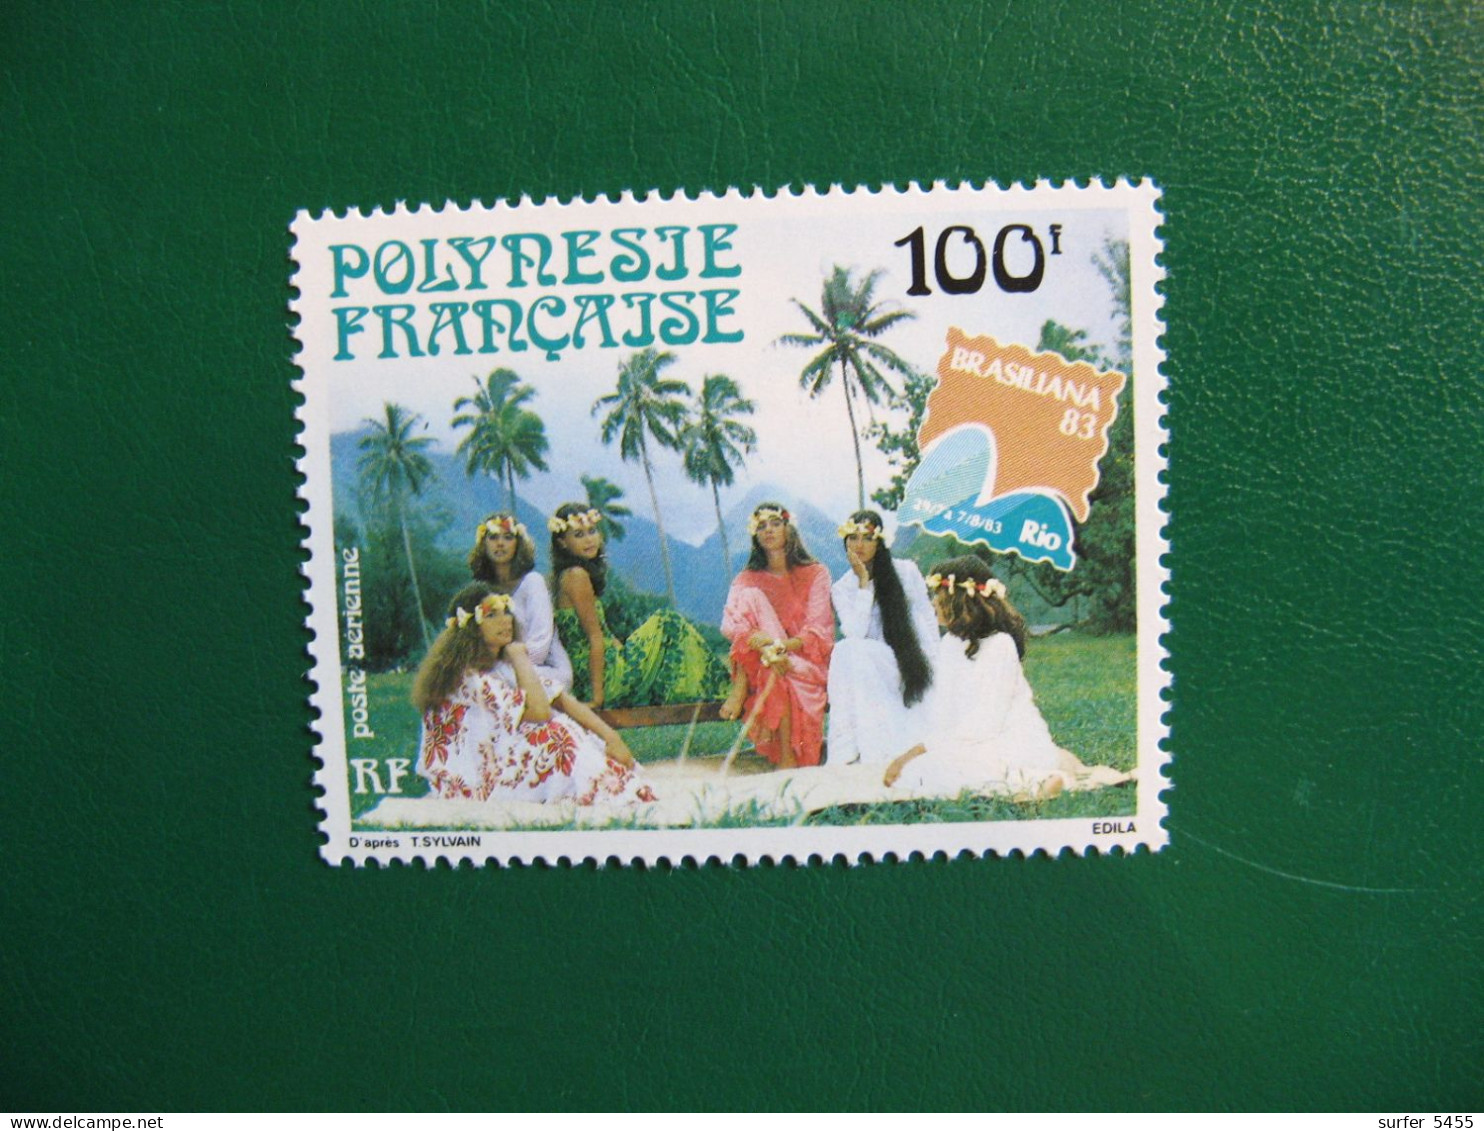 P0LYNESIE PO AERIENNE N° 176 TIMBRE NEUF ** LUXE - MNH - SERIE COMPLETE - FACIALE 0,84 EURO - Nuevos